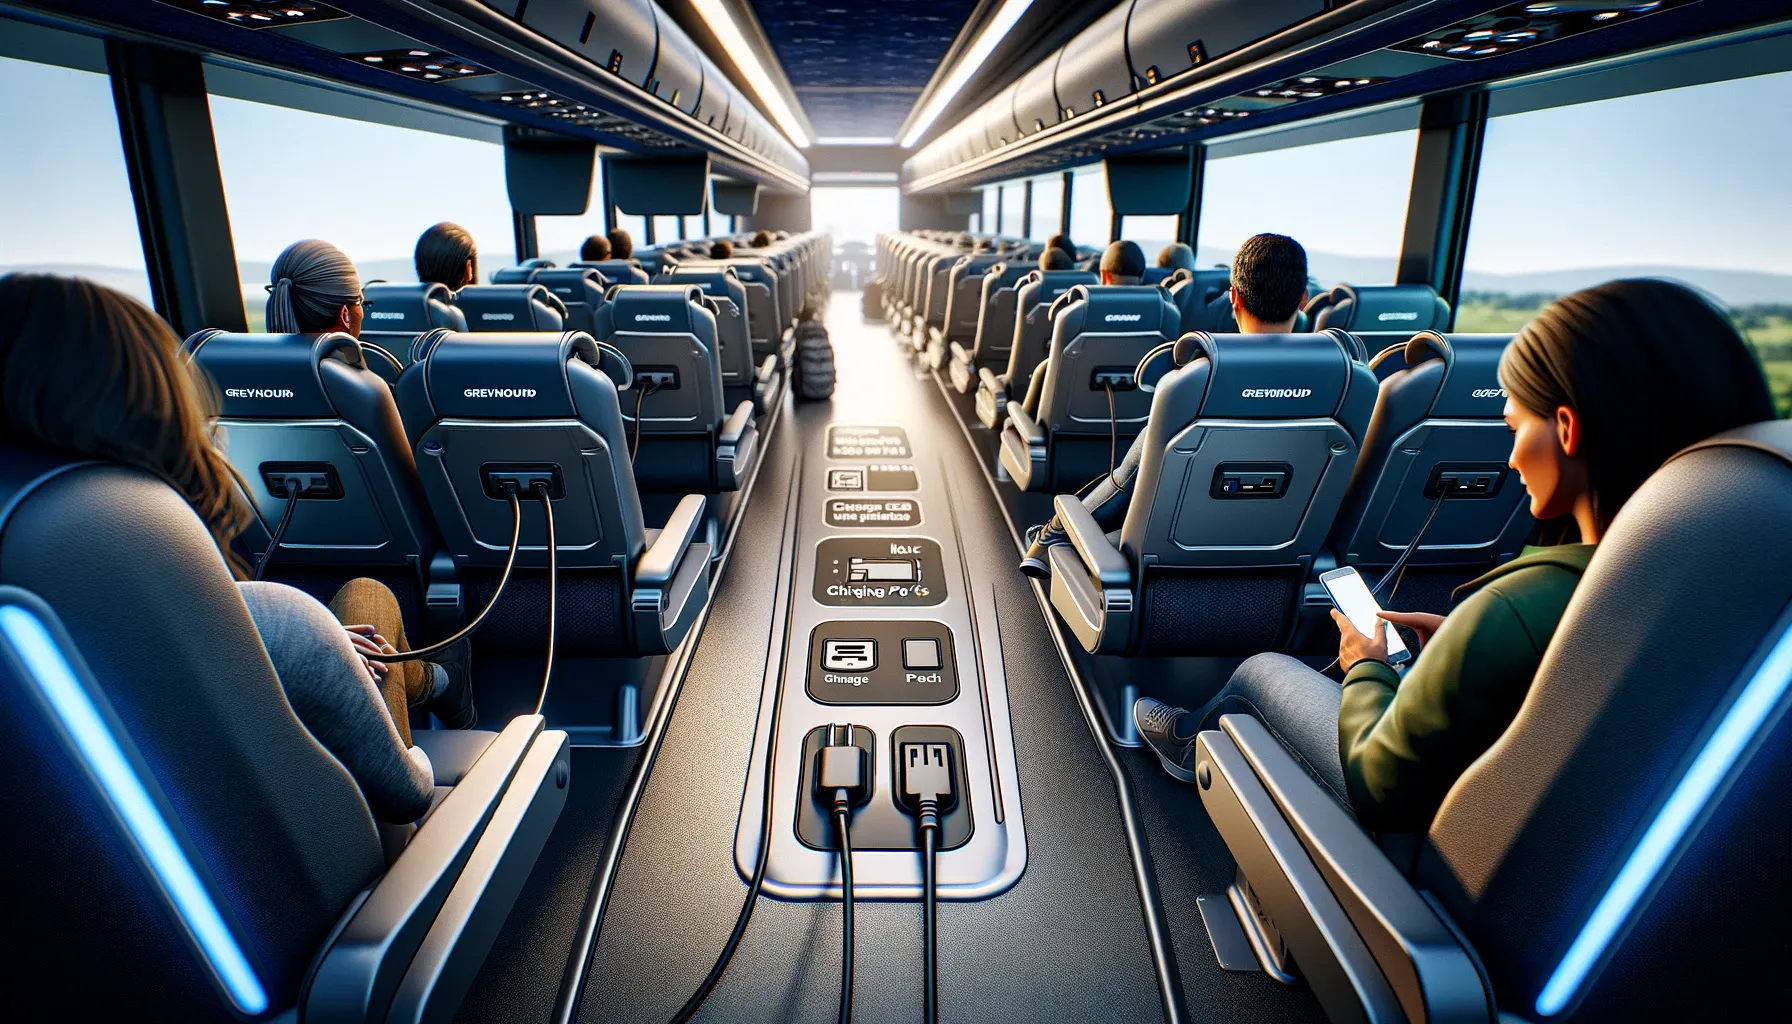 Do Greyhound Buses have Charging Ports?